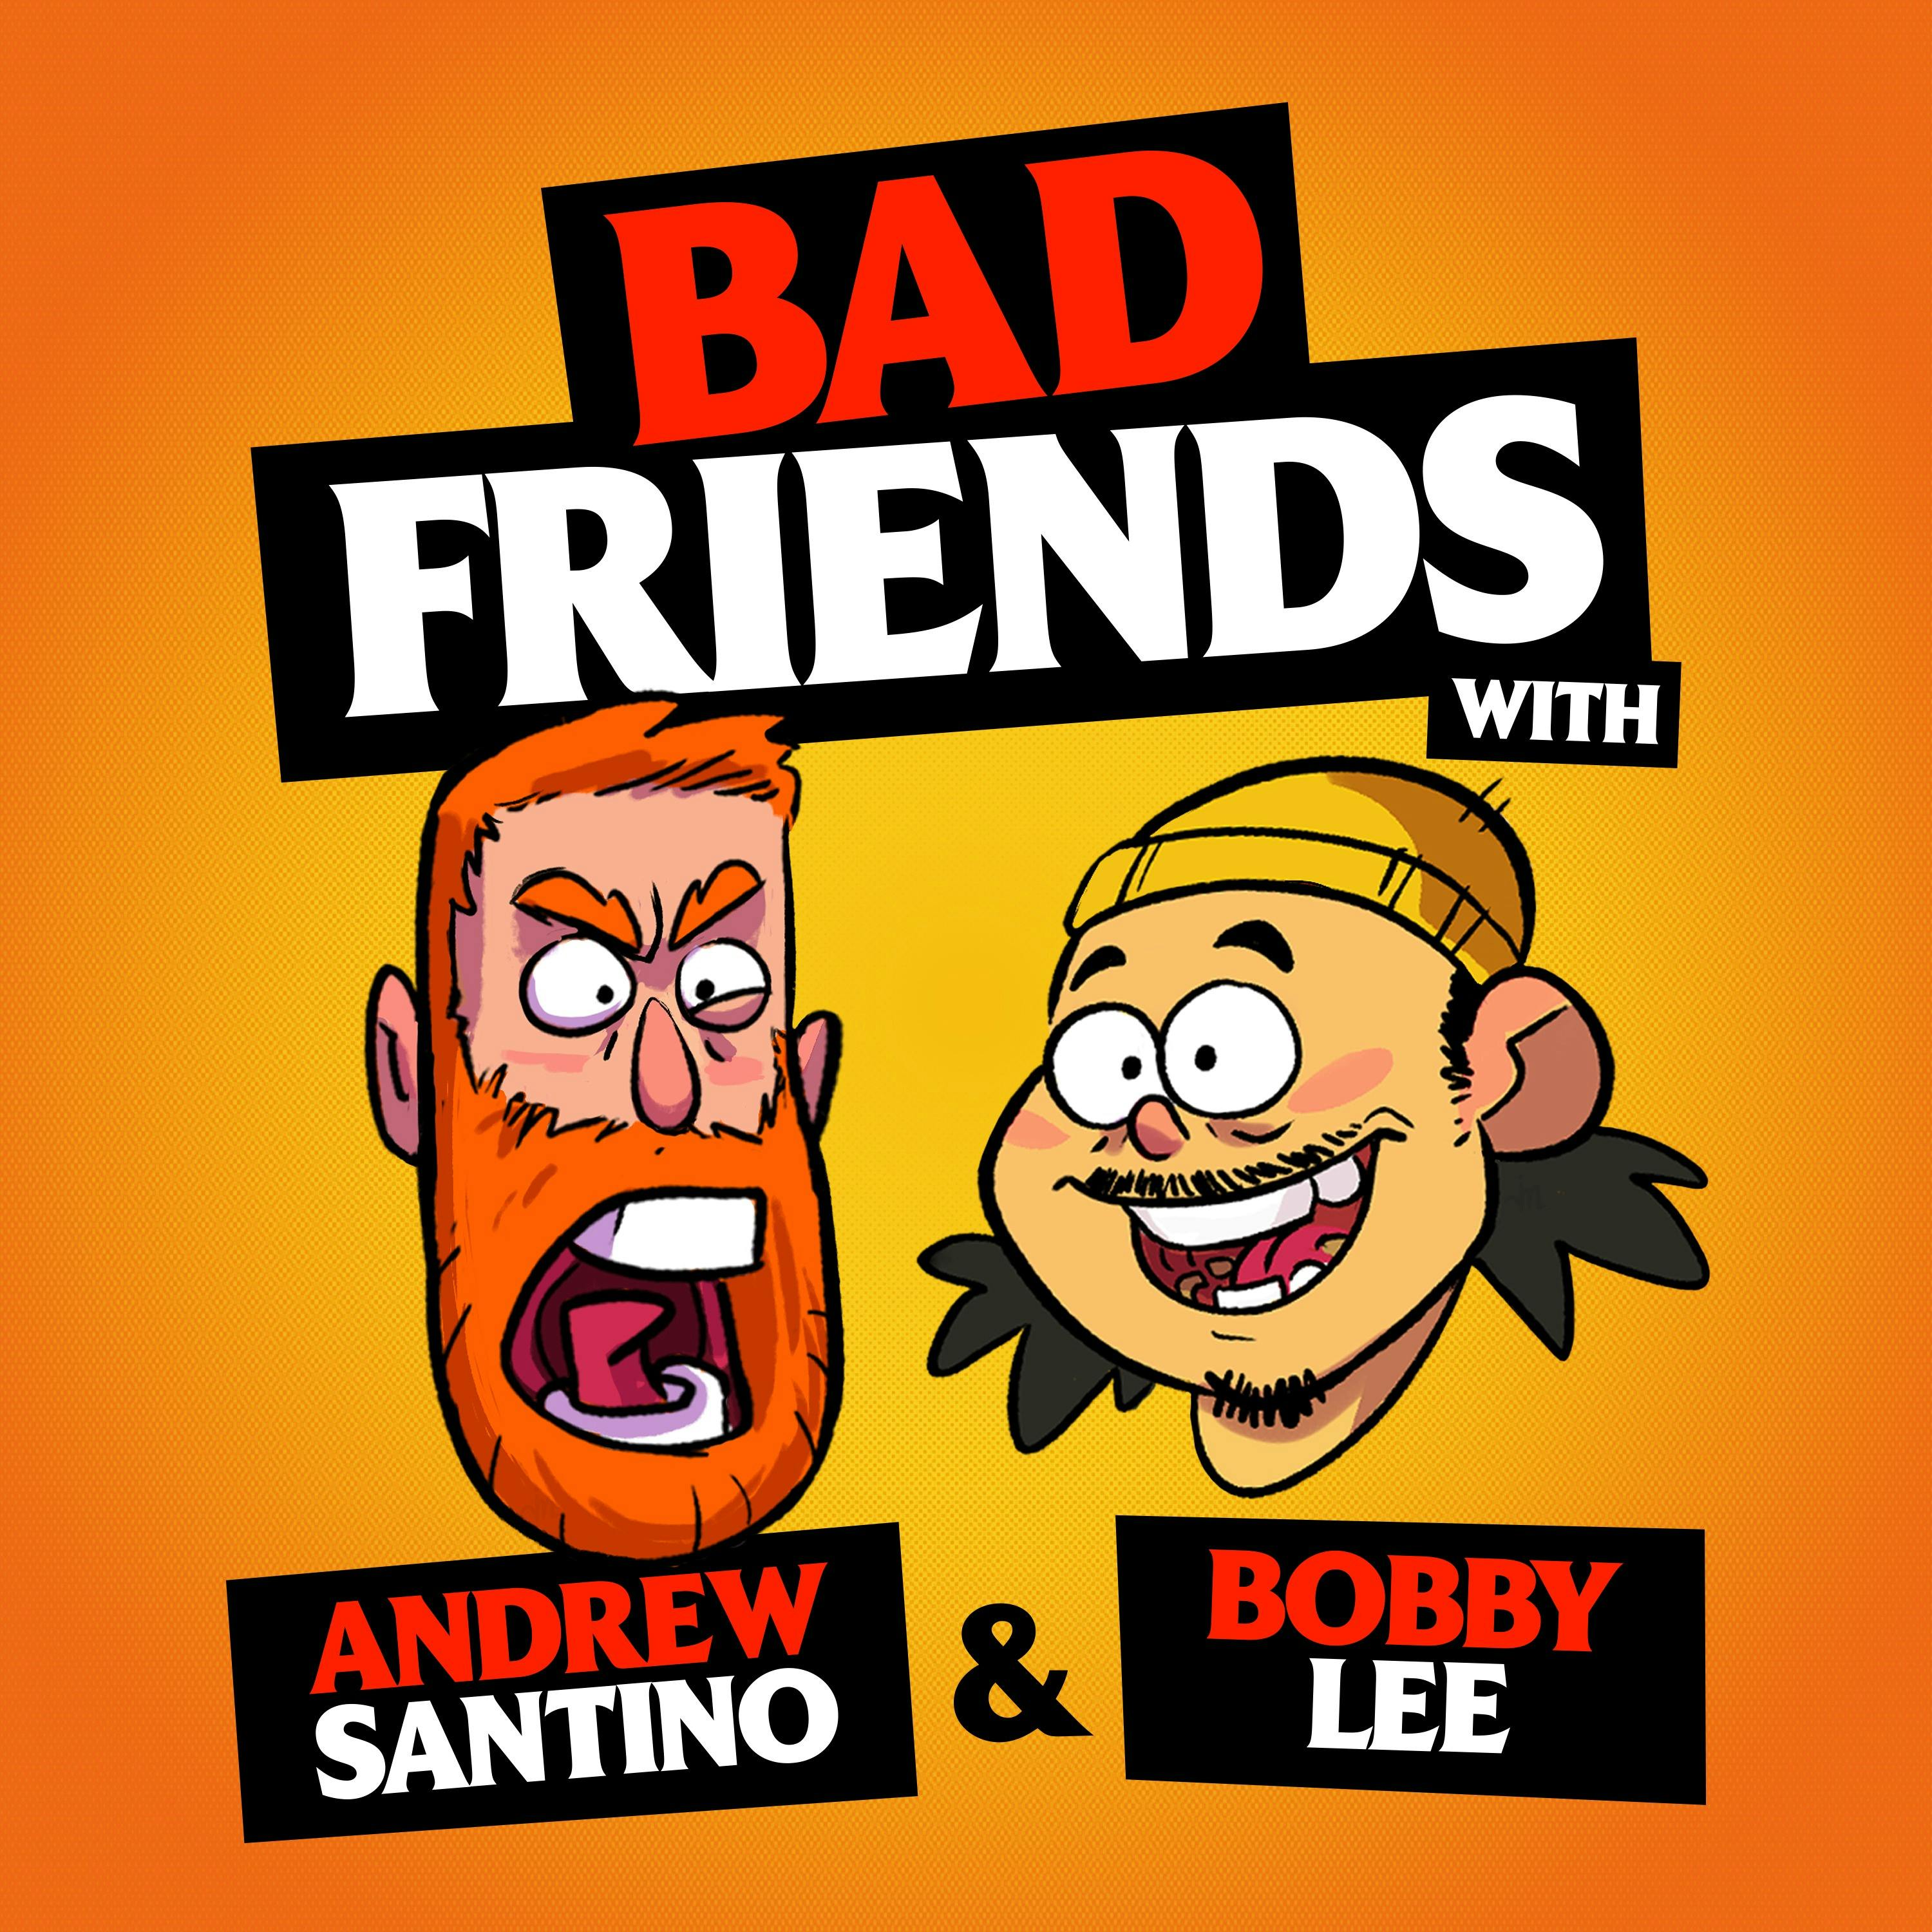 President Lee Addresses the Nation and Santino Is Back! by Andrew Santino and Bobby Lee